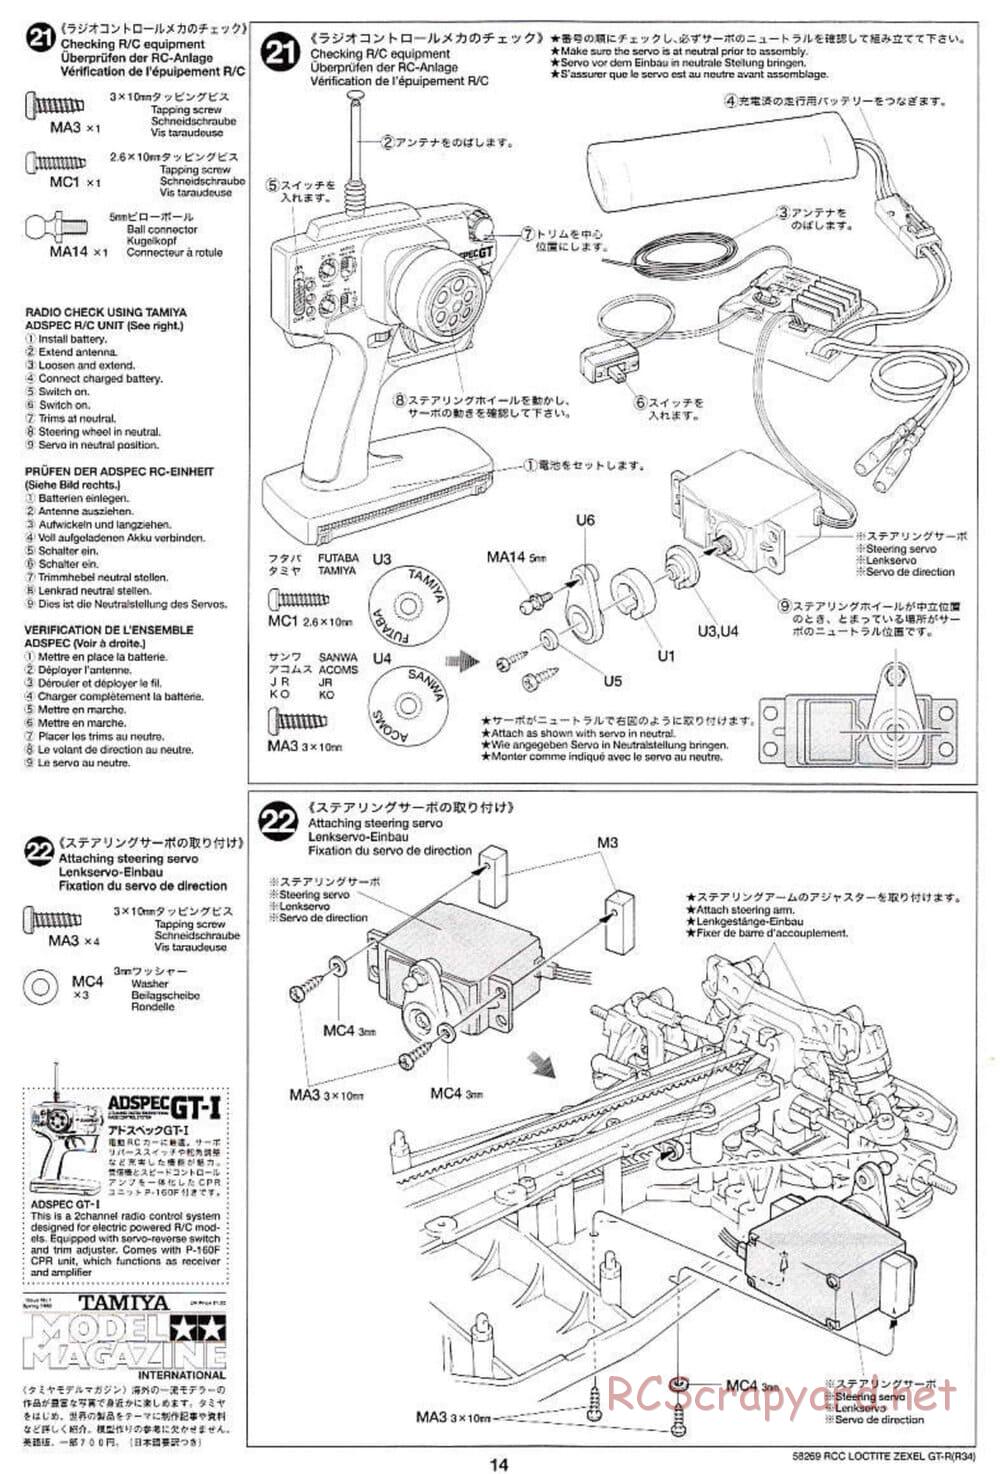 Tamiya - Loctite Zexel Skyline GT-R (R34) - TA-04 Chassis - Manual - Page 14